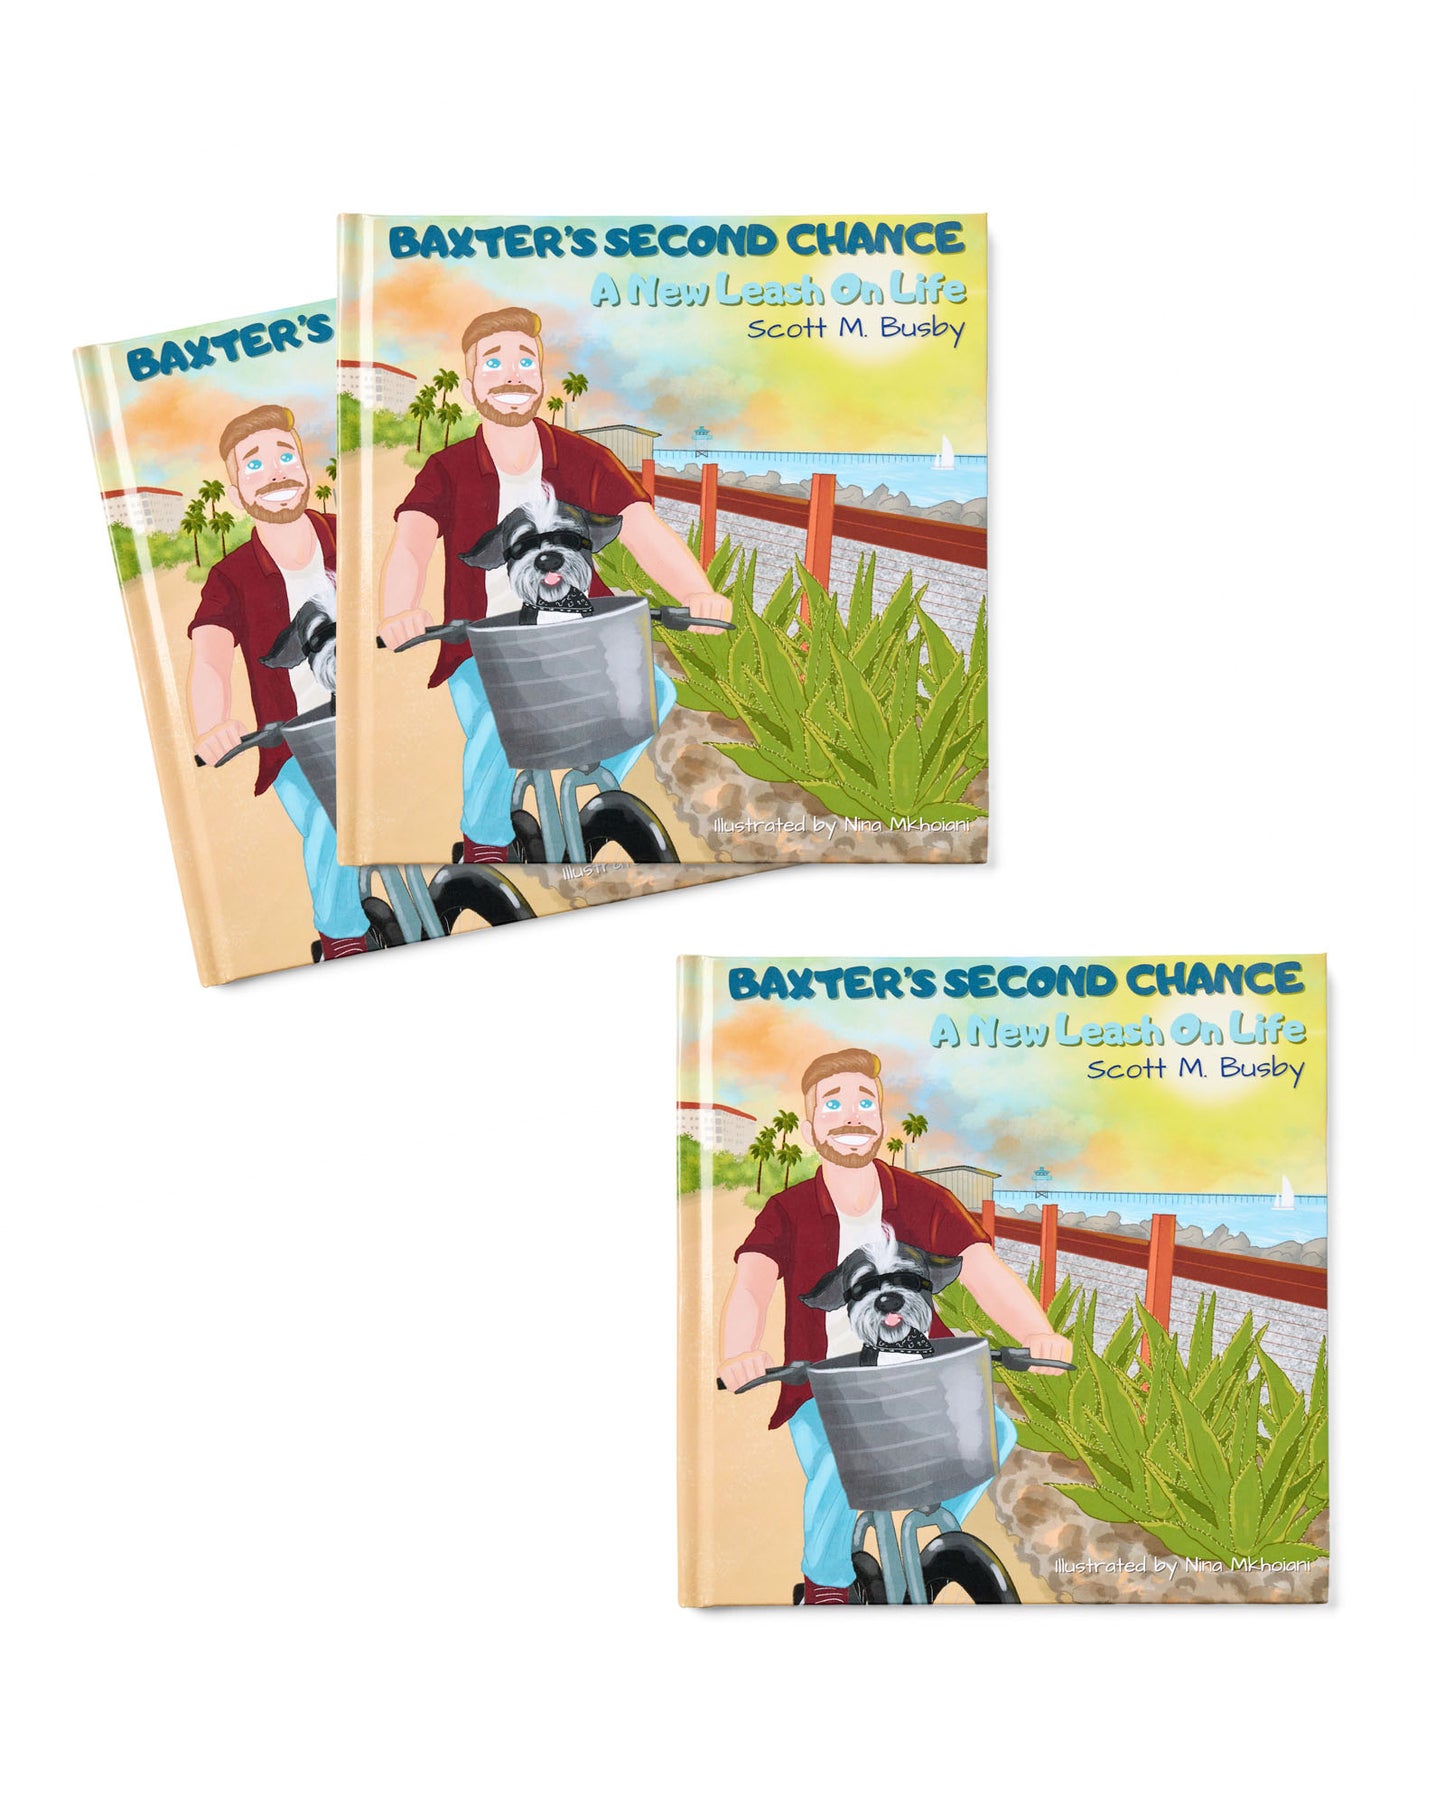 Buy 2 Get One Free - Baxter's Second Chance Gift Bundle - Hardcover (Includes Free Shipping)